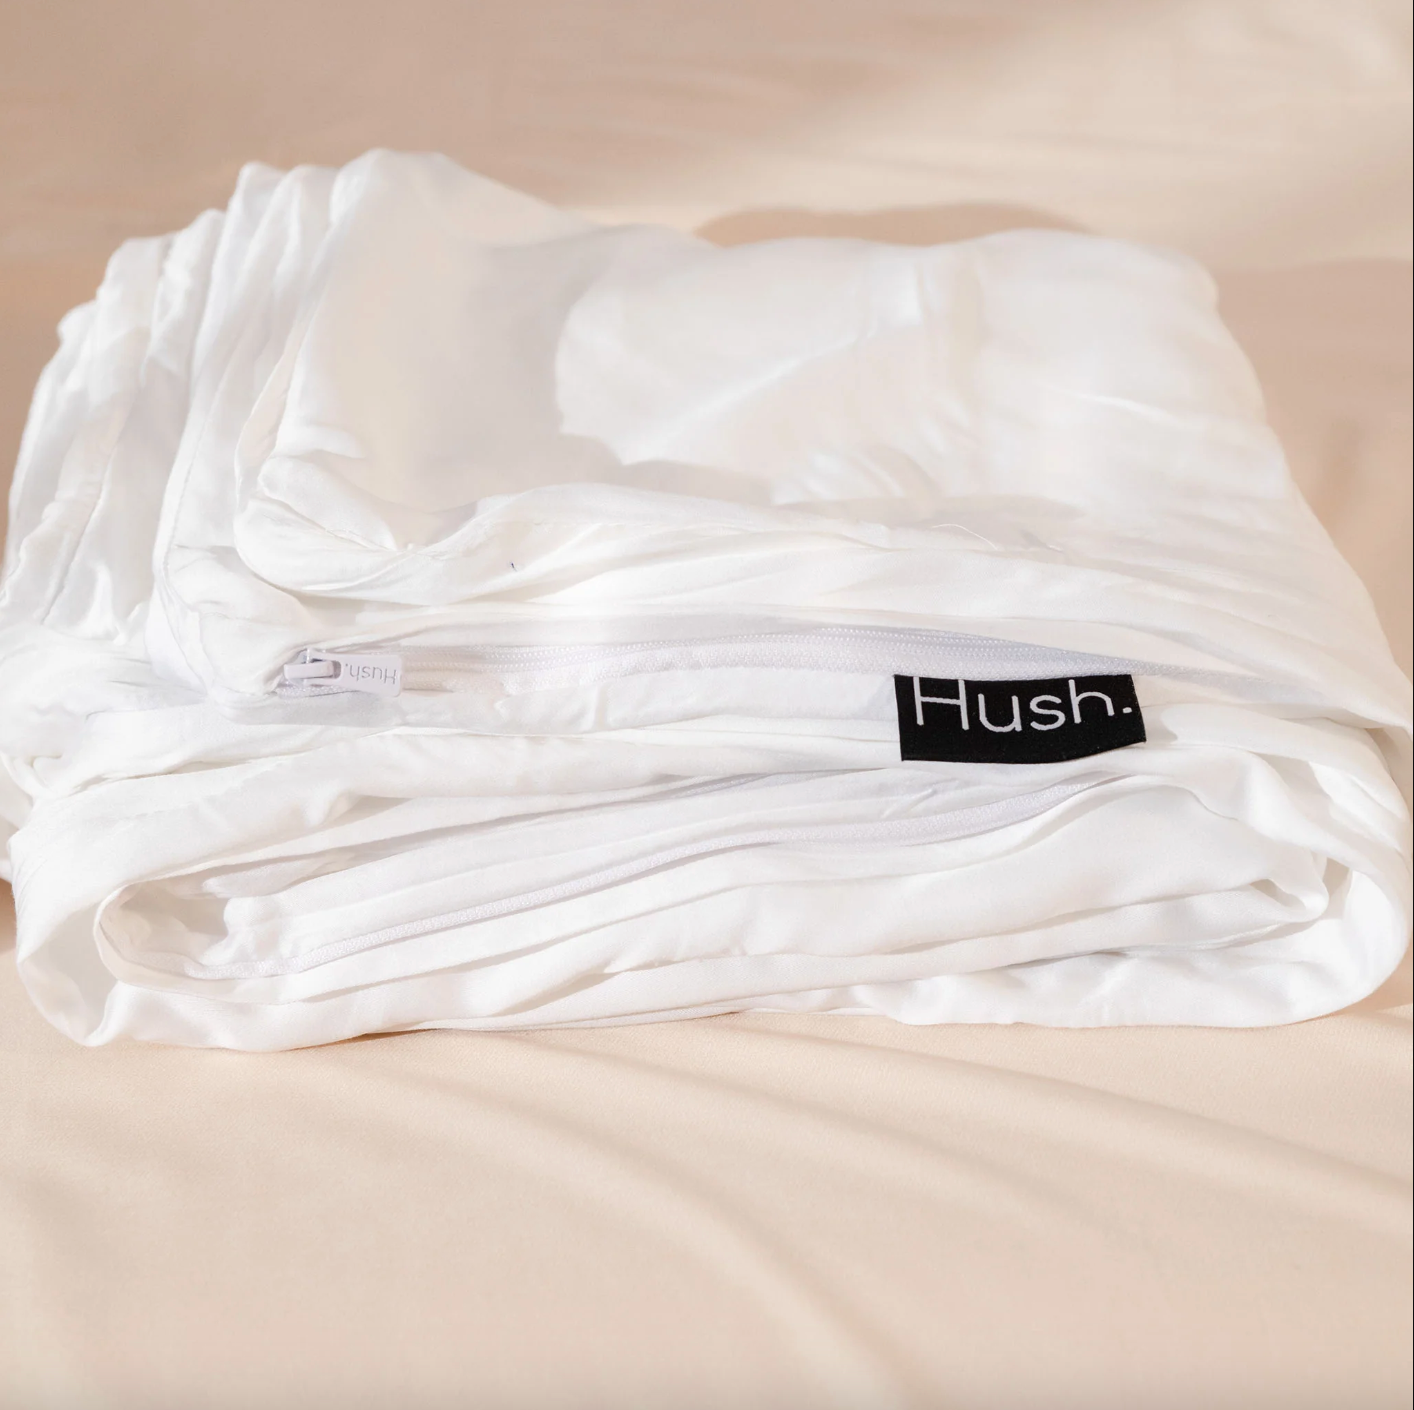 Hush Blanket Classic & Iced Covers